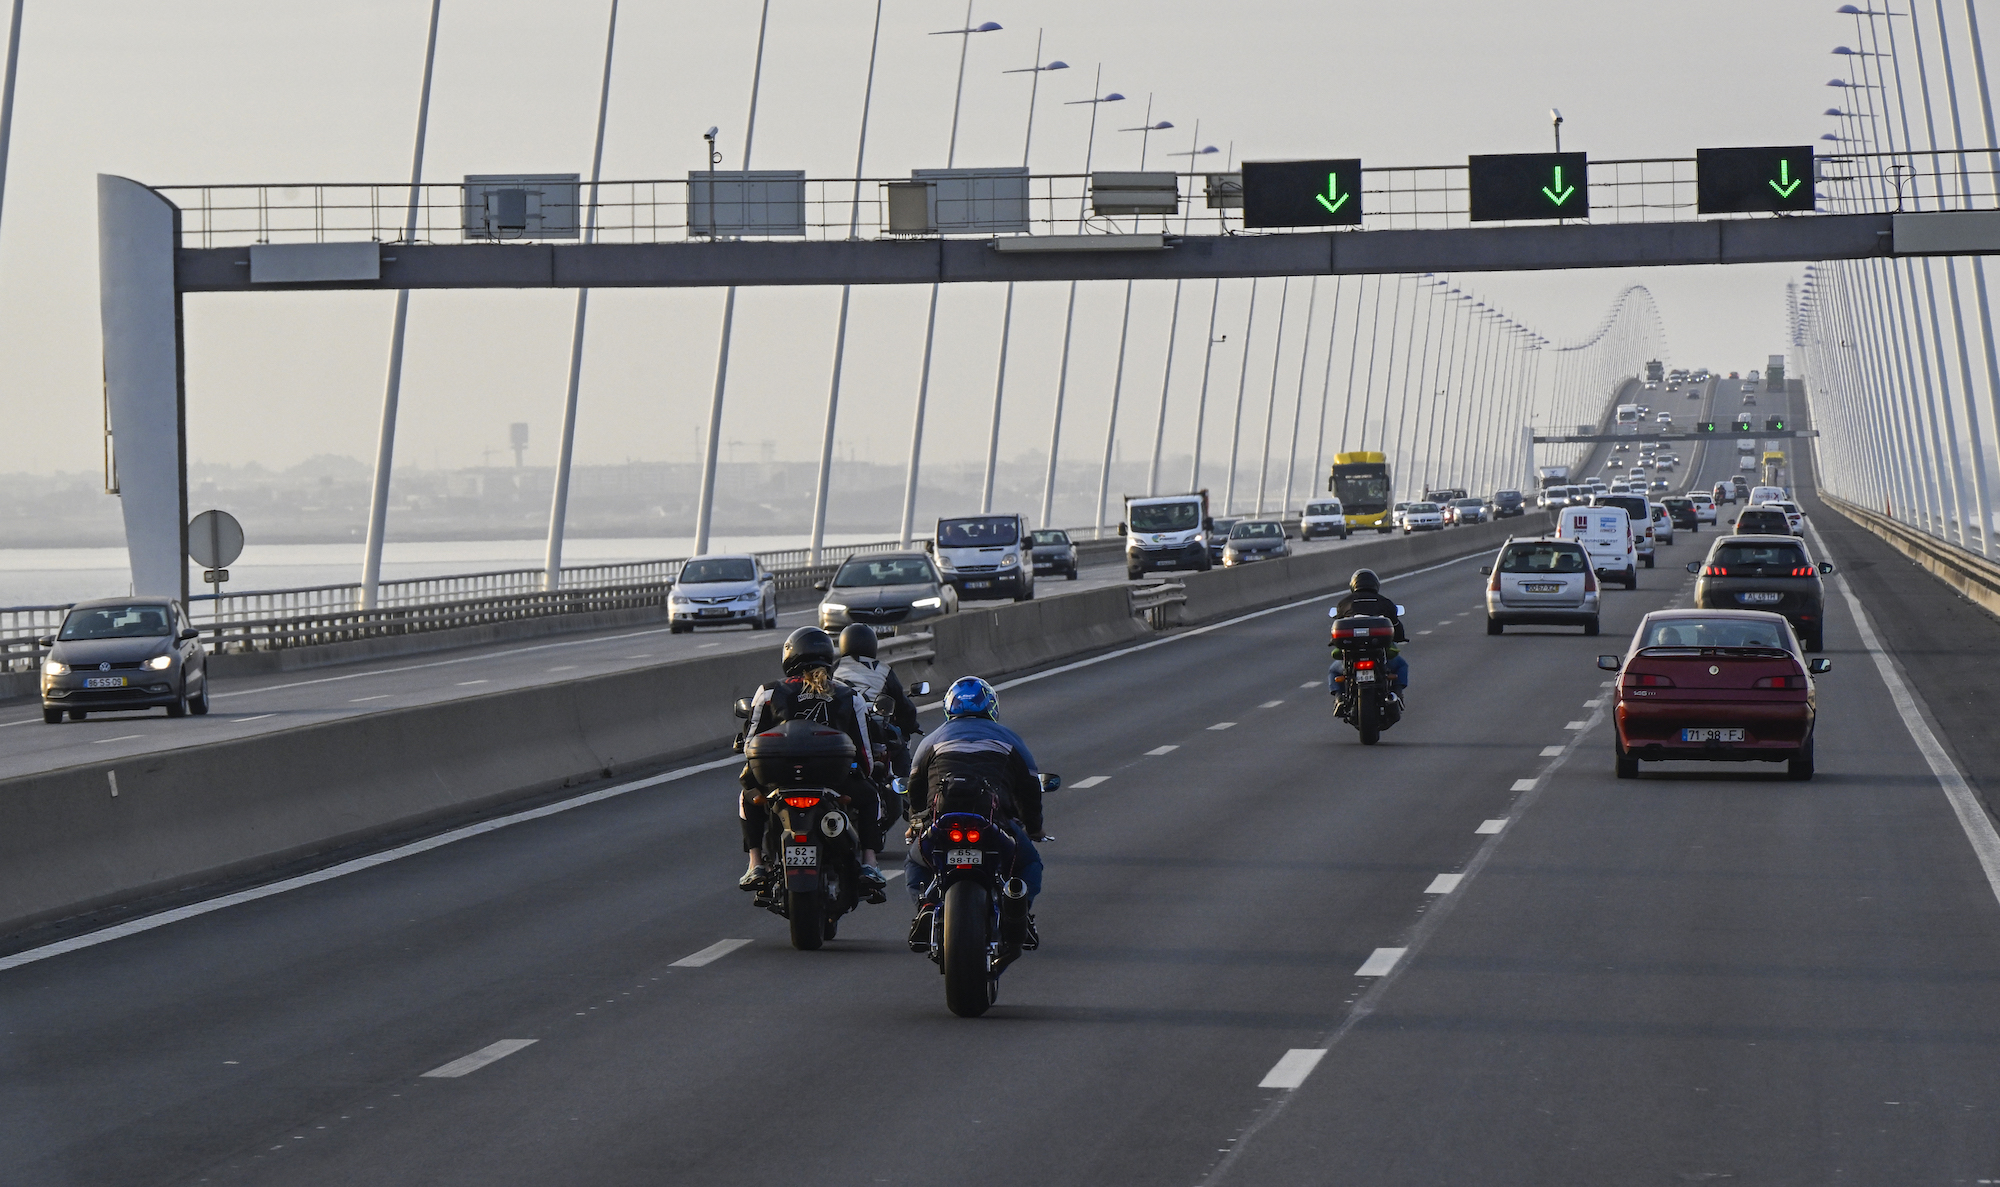 People riding a motorcycle in high winds potentially across a bridge.